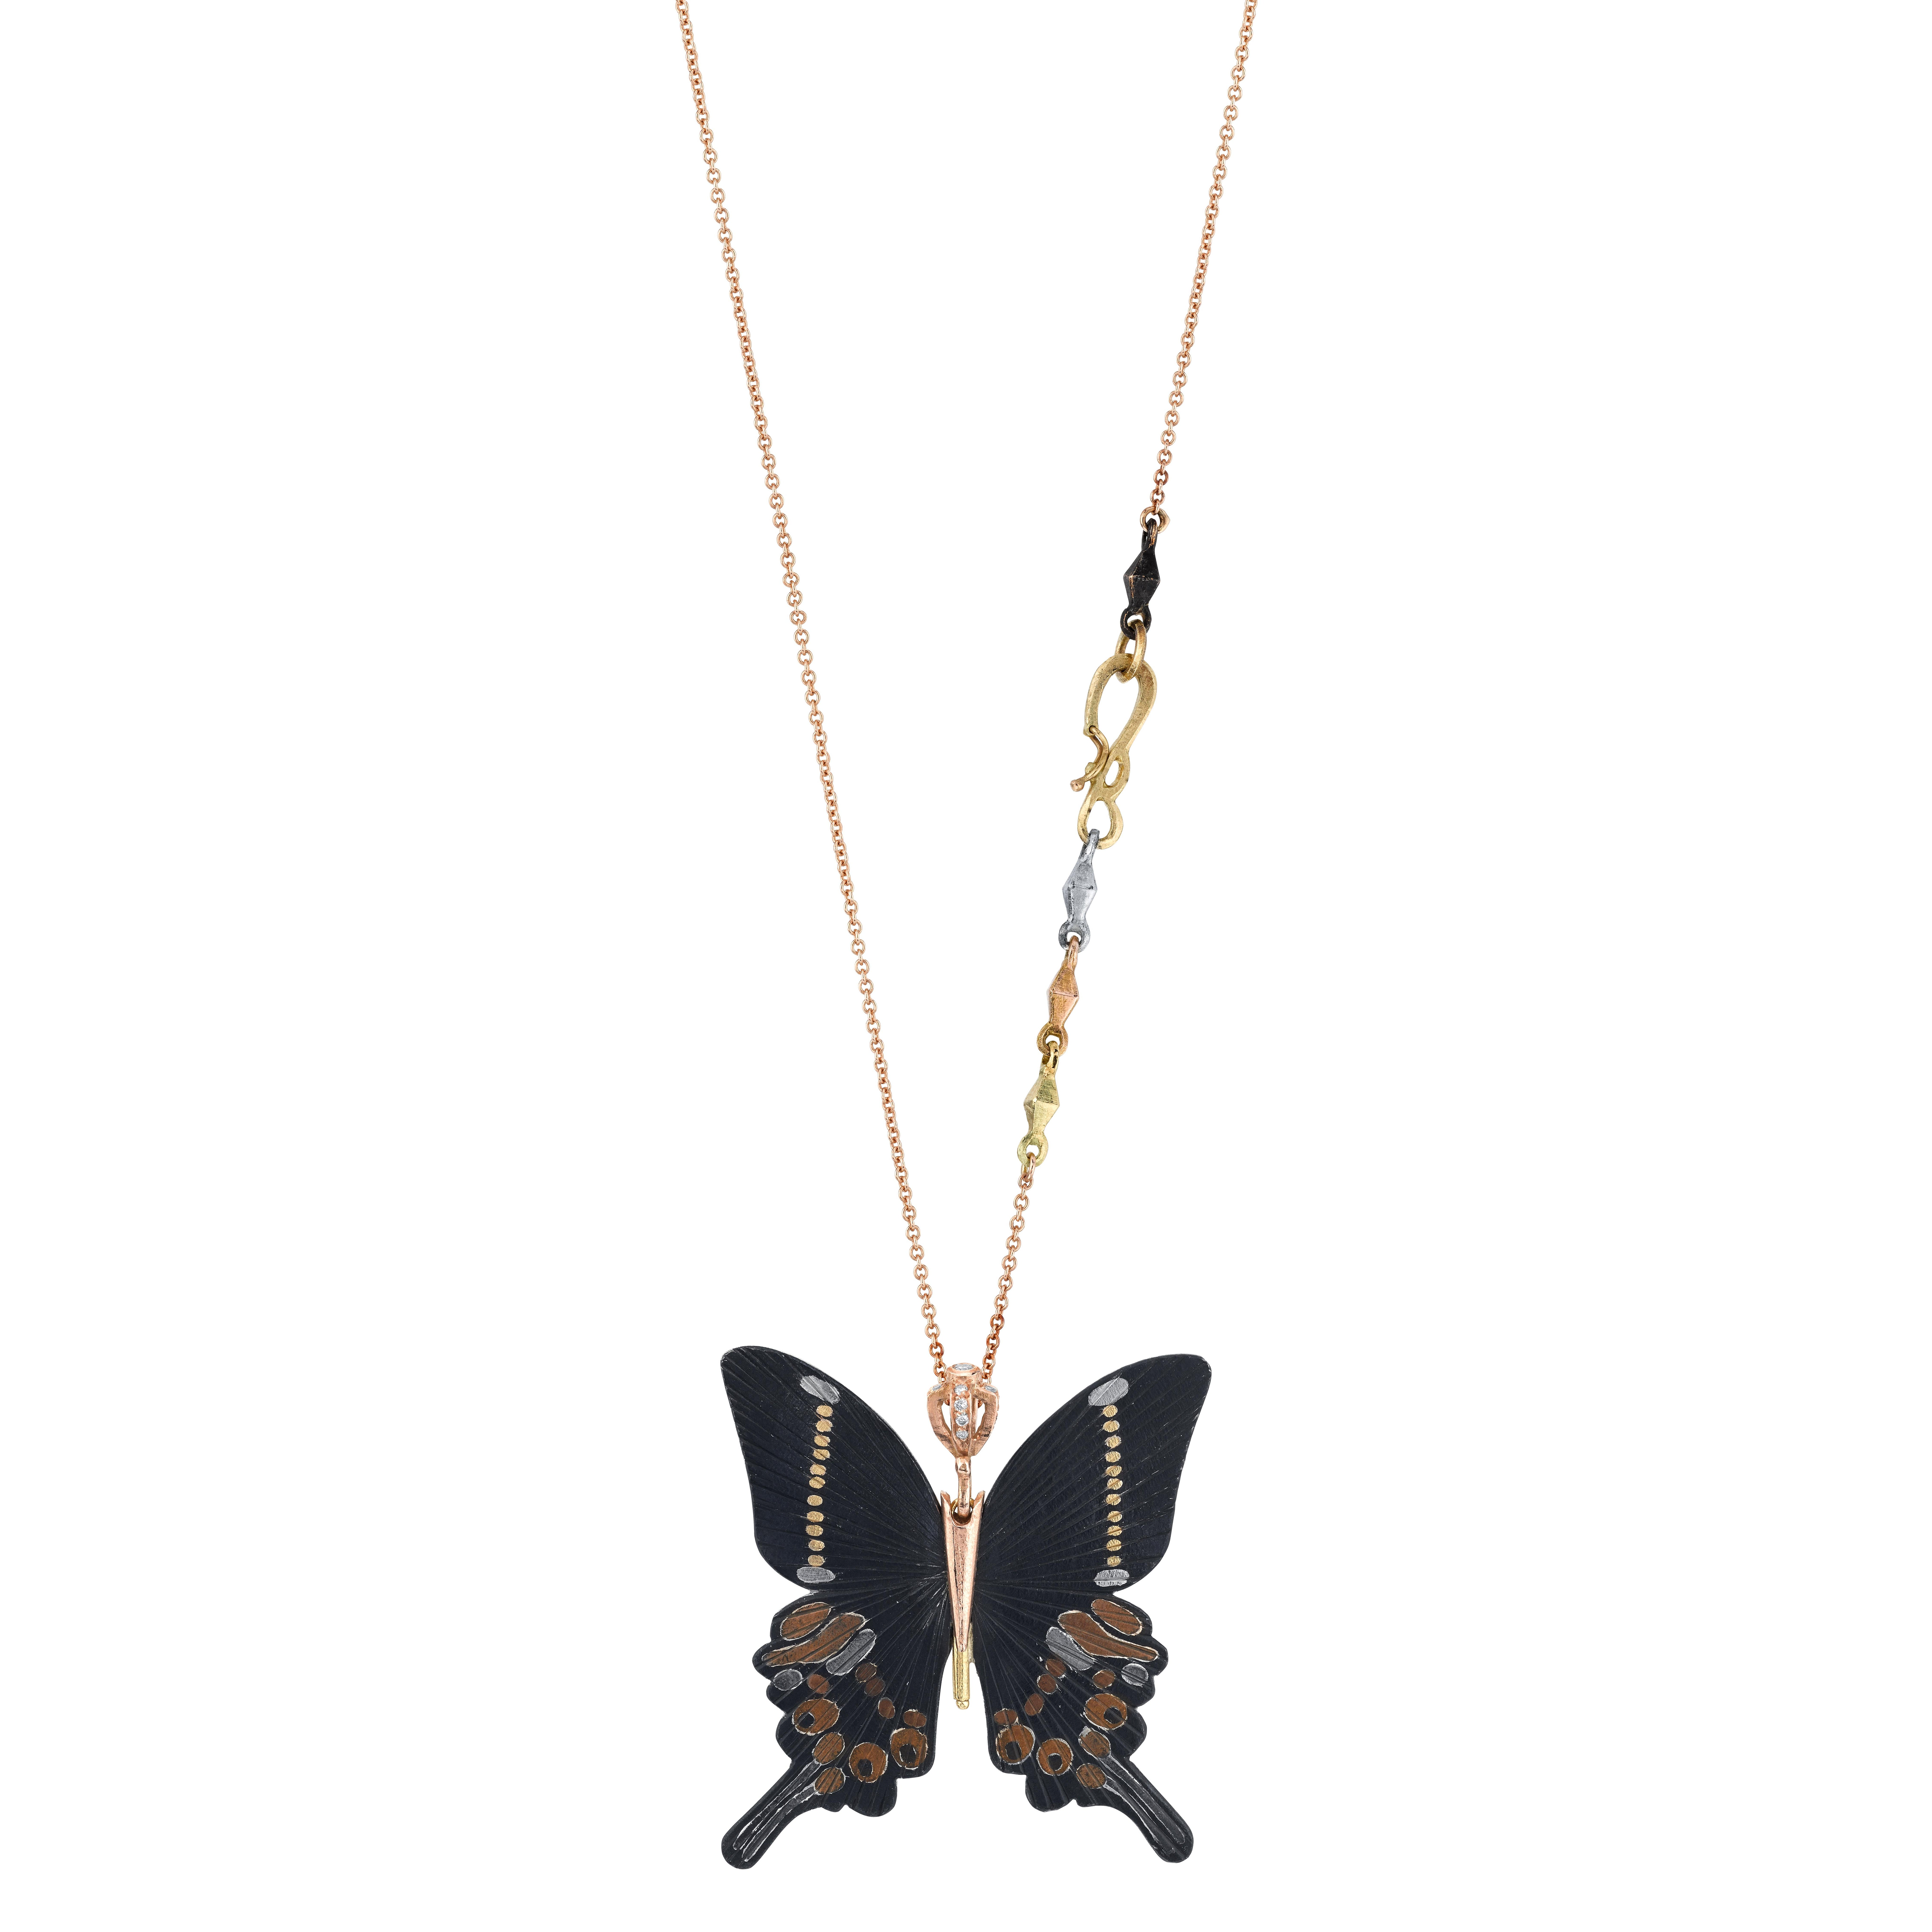 James Banks's signature butterfly necklace features a Gloss Swallowtail butterfly with a hinge at the center to allow movement of the wings, set in 18k Yellow gold, 14k Rose gold, 18k White Palladium, Shakudo, Shibuichi, Copper, Sterling Silver,